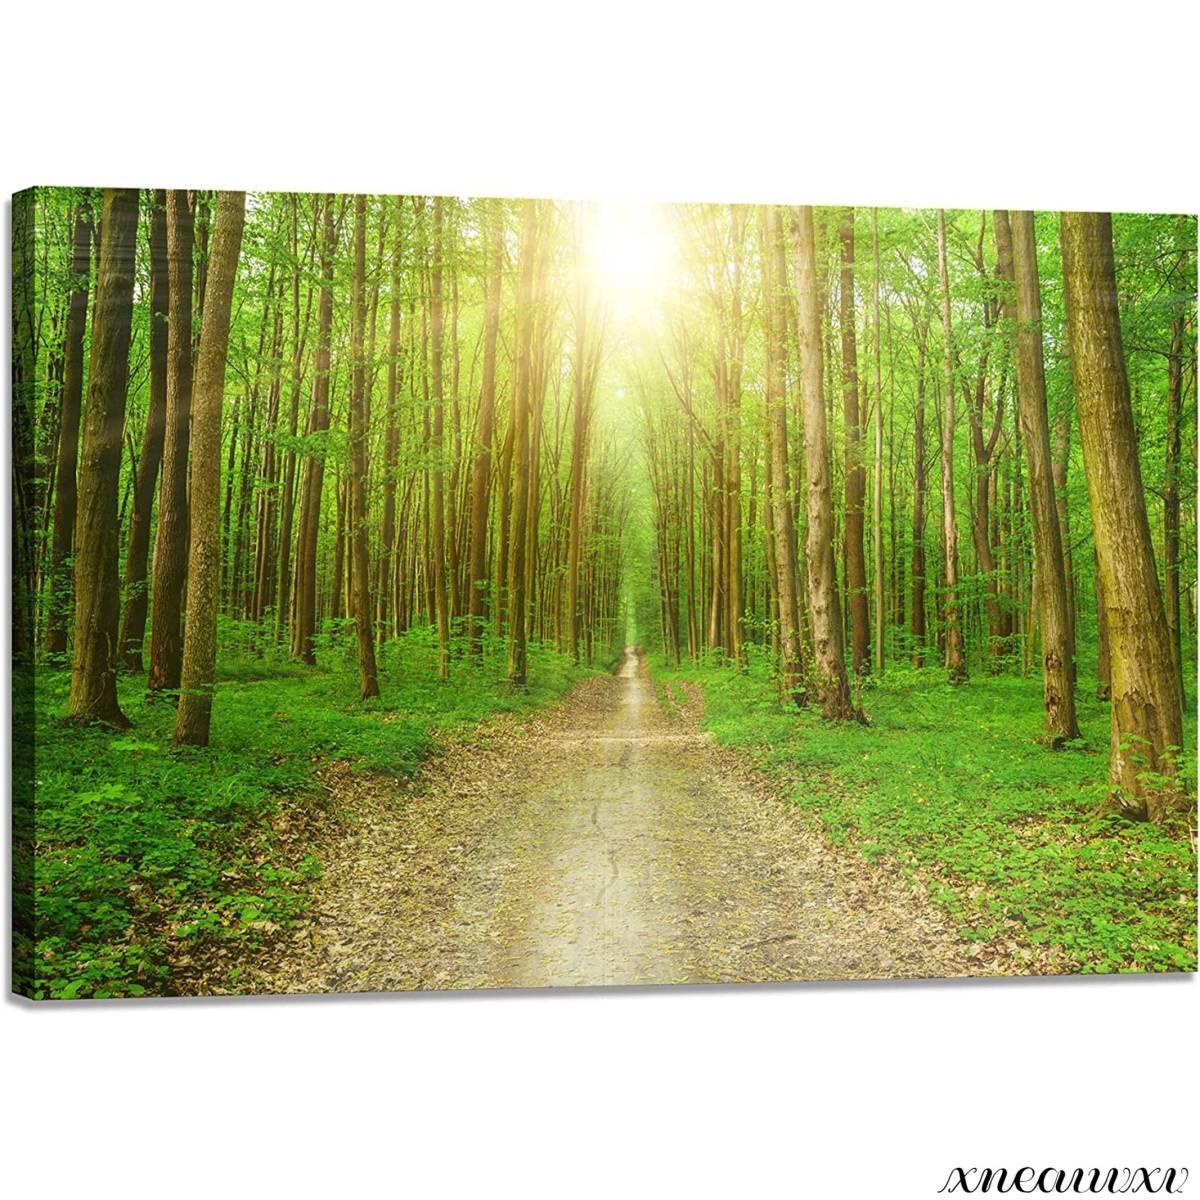 Light in the Forest Art Panel Nature Interior Landscape Wall Hanging Room Decoration Decorative Painting Canvas Painting Fashion Good Luck Overseas Art Appreciation Redecoration, artwork, painting, graphic